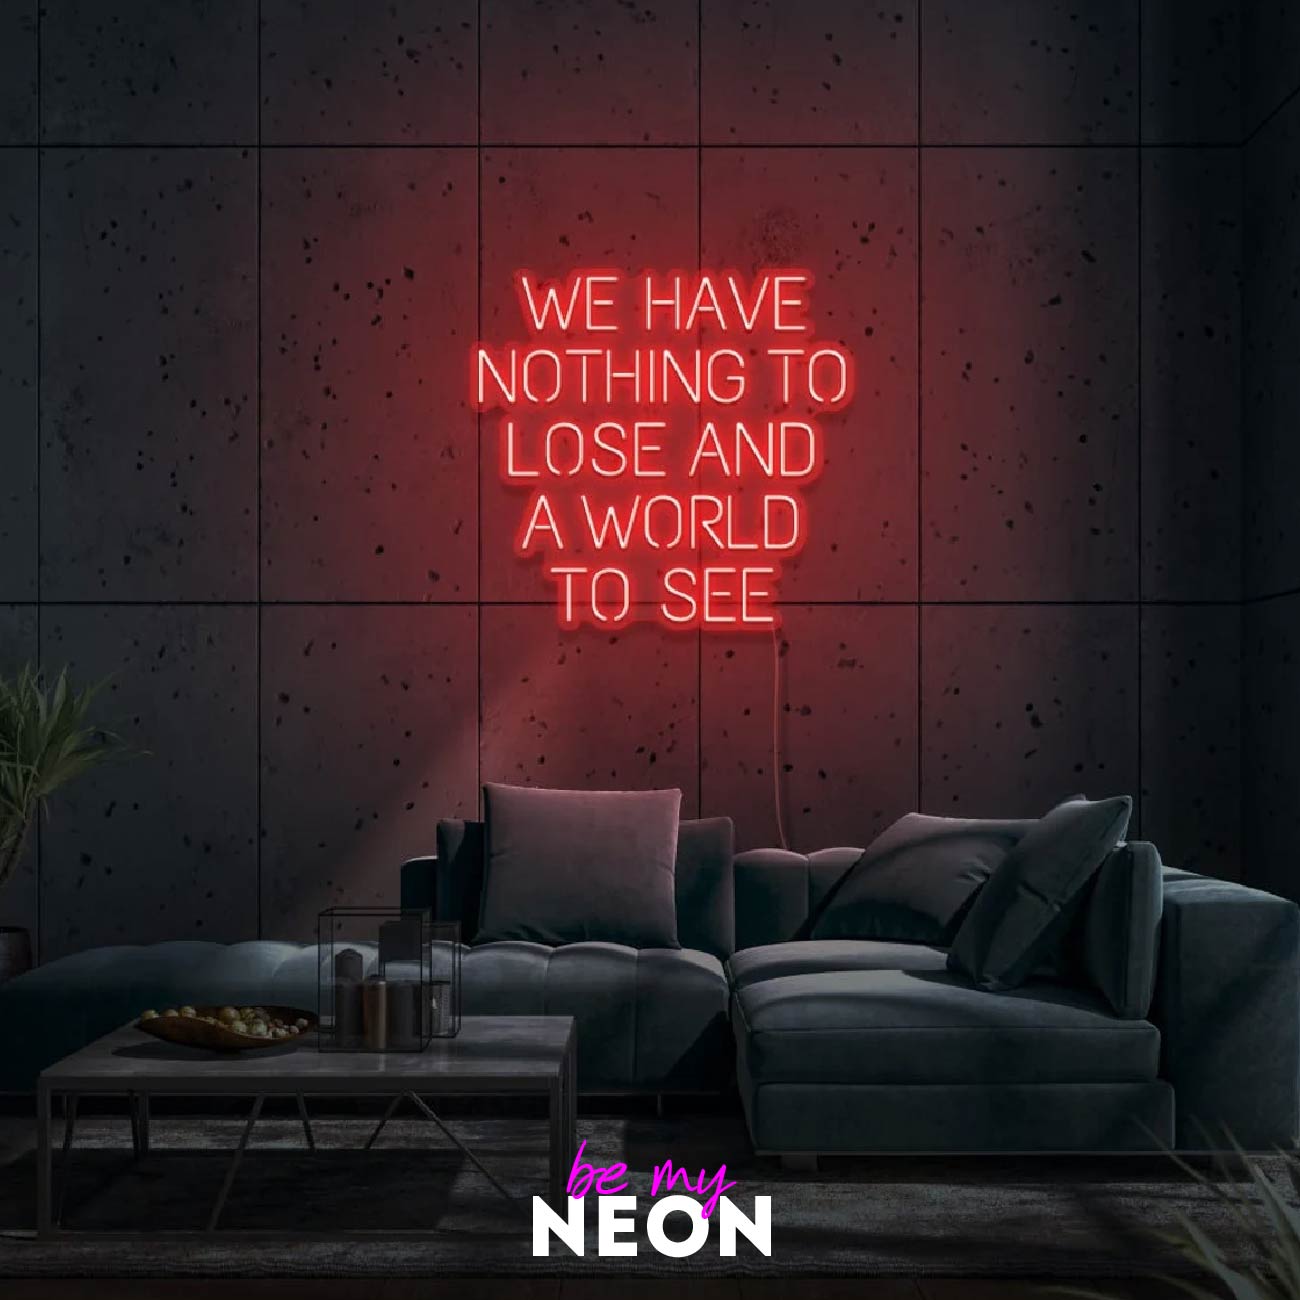 "We have nothing to lose and a world to see" LED Neonschild